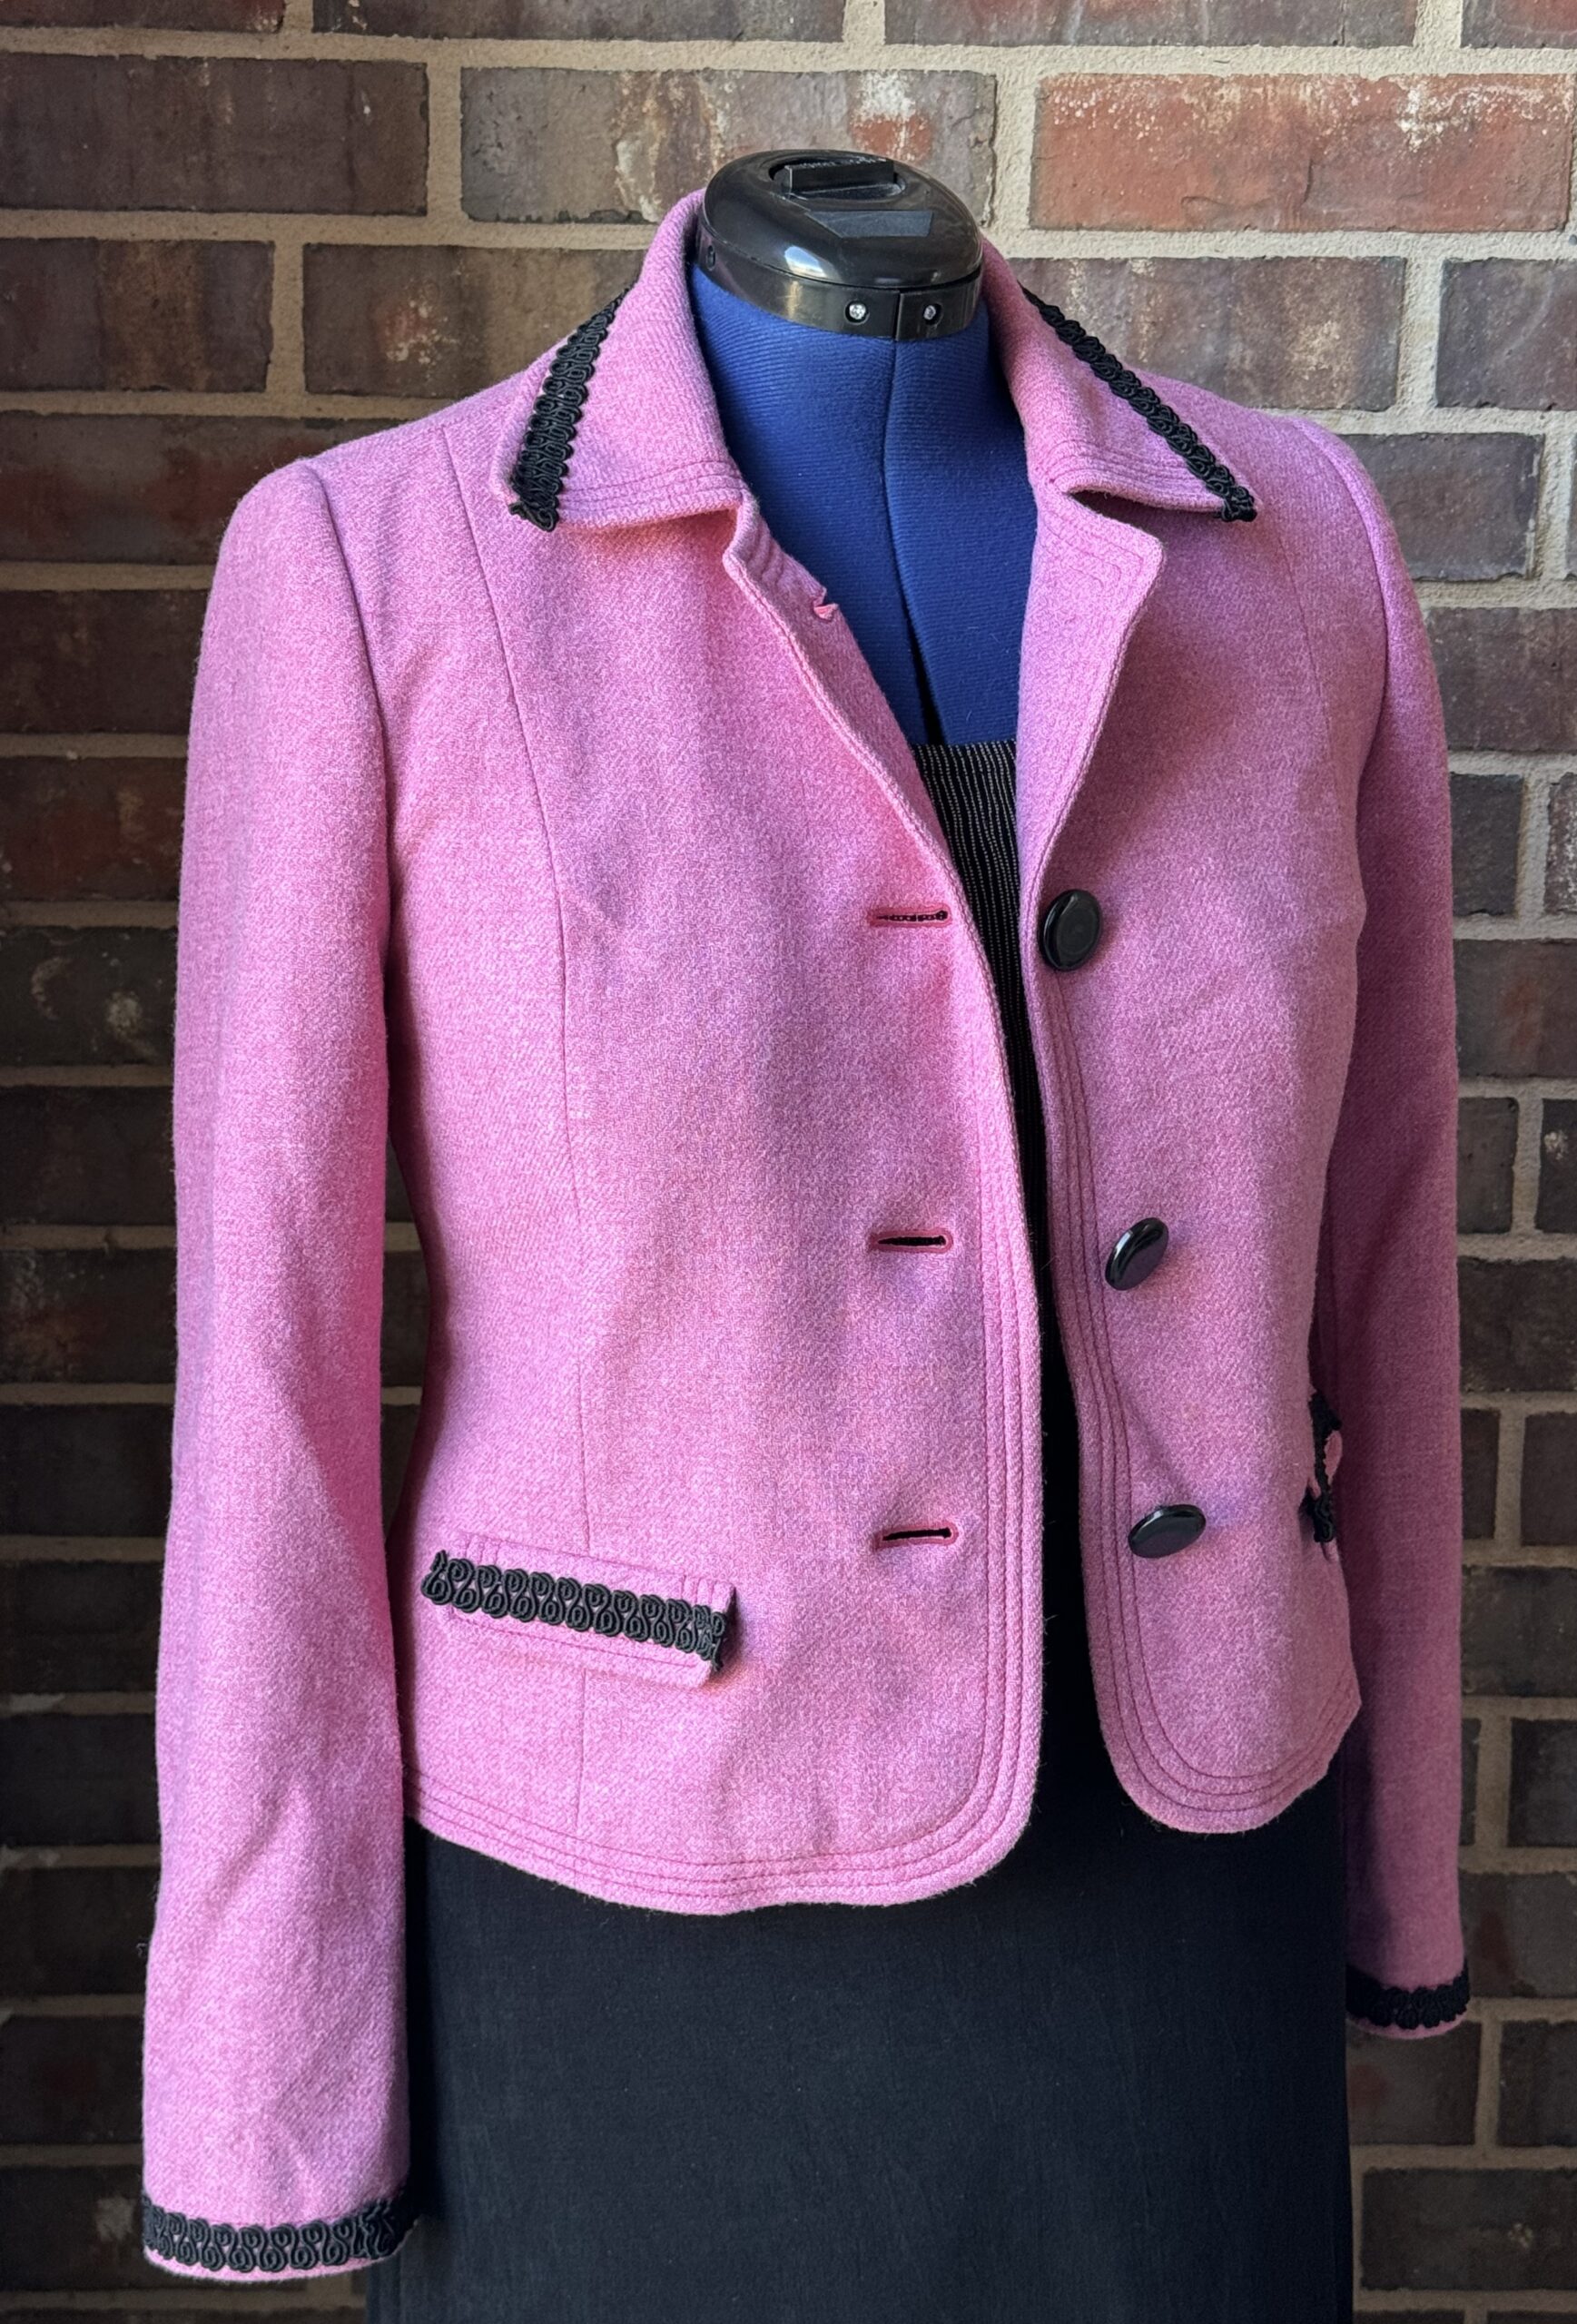 A pink jacket on a mannequin in front of a brick wall.